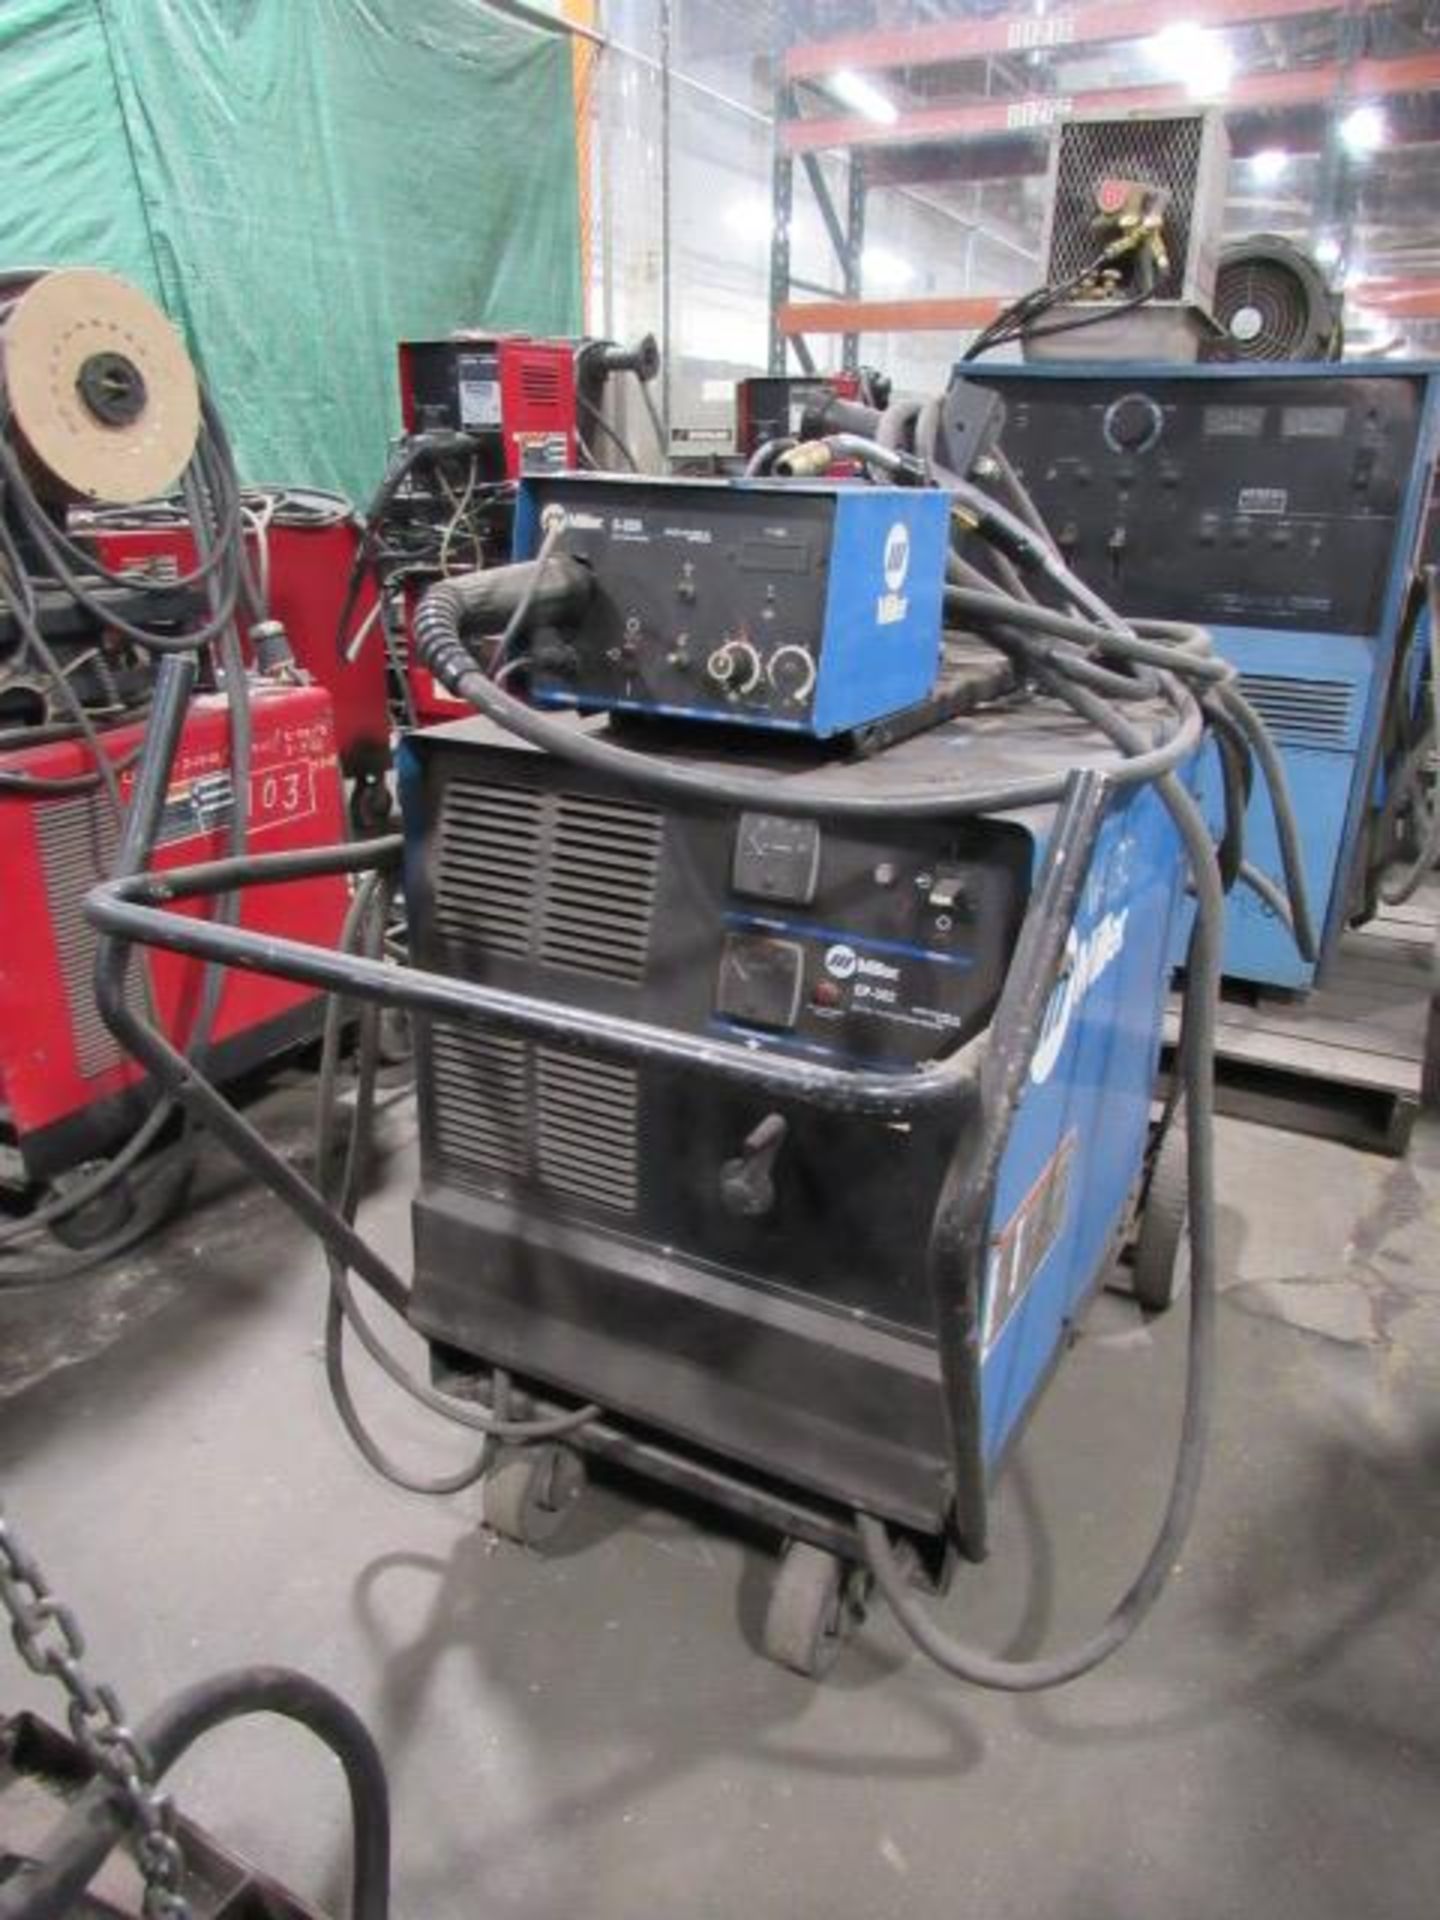 Miller CP-302 Portable Welder with S-22A Wire Feeder, sn:LE463198